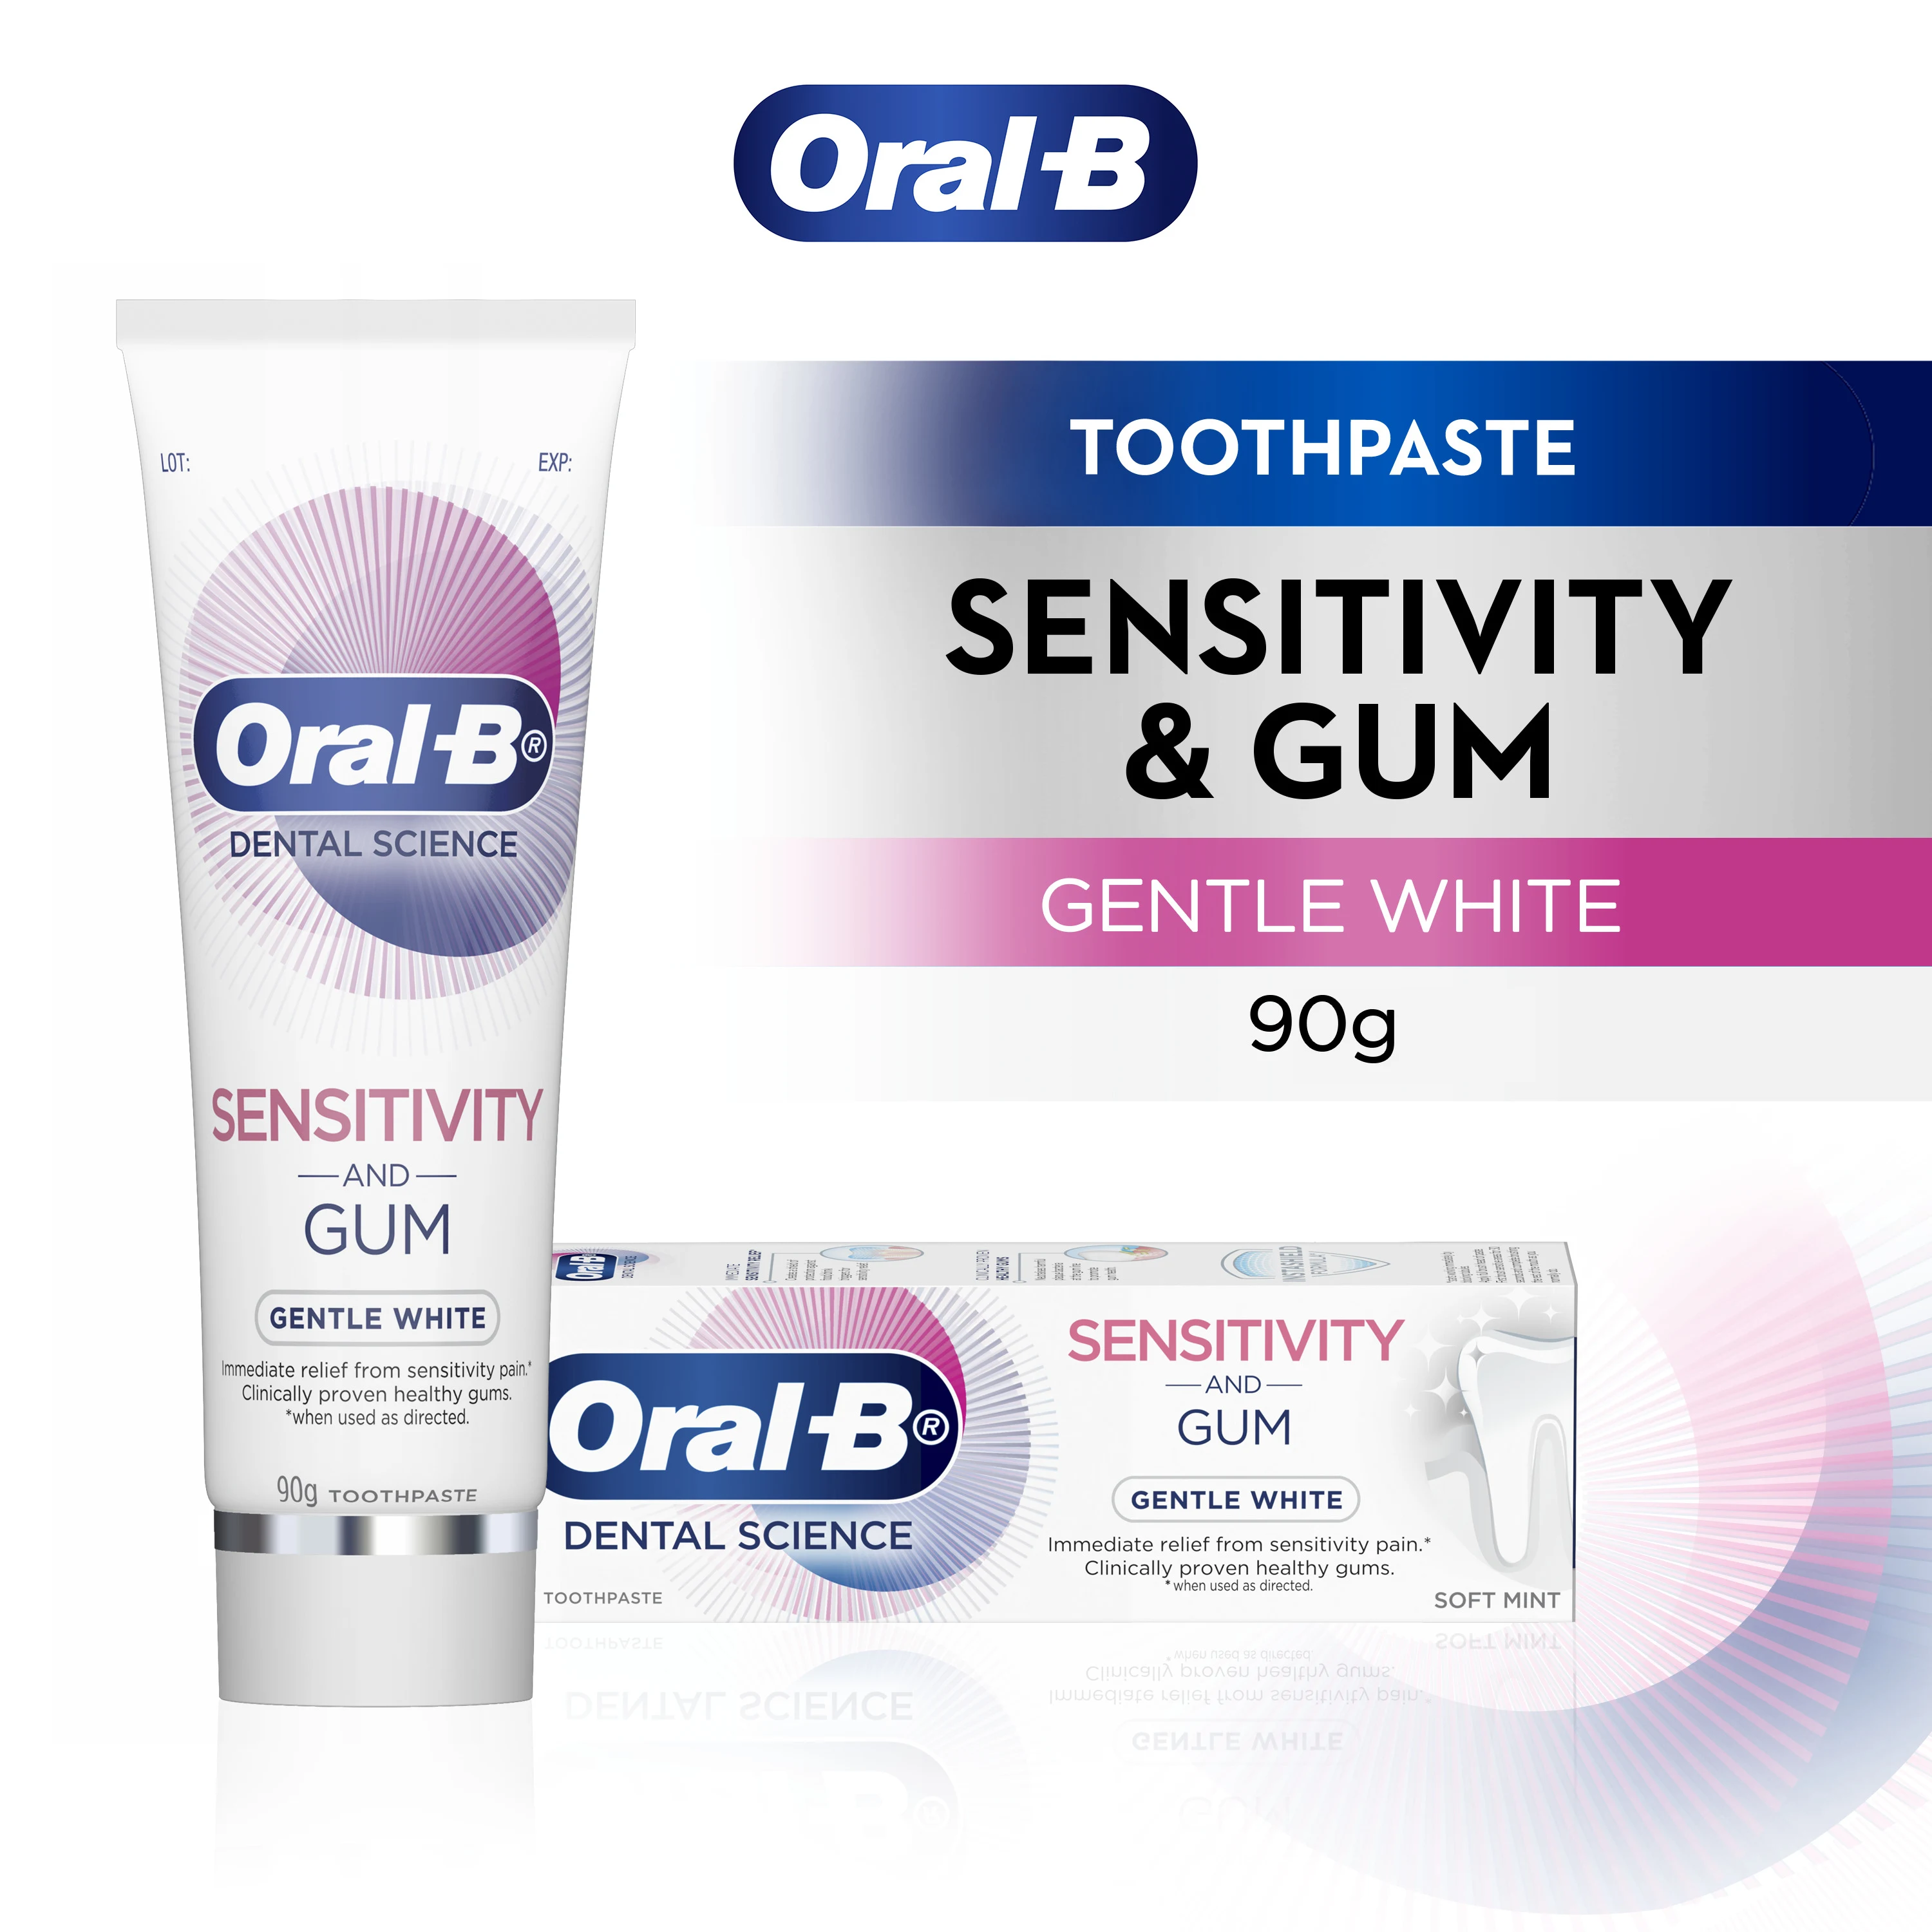 Oral-B Dental Science Sensitivity and Gum Gentle White Toothpaste  